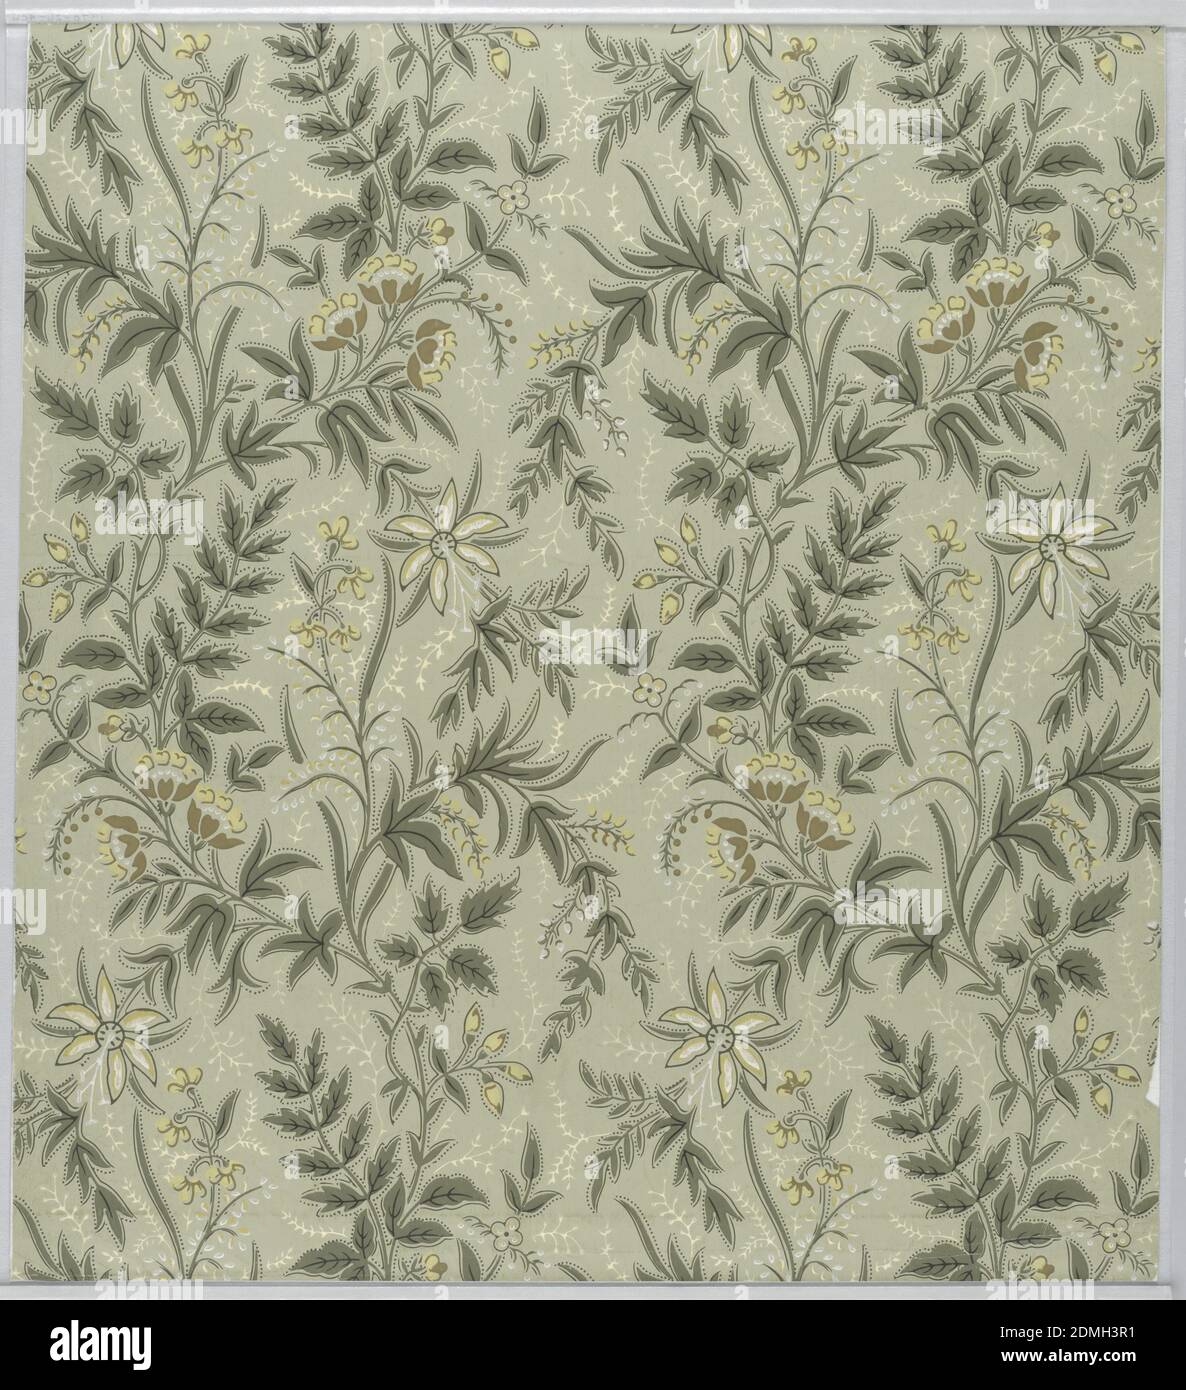 Sidewall, Machine-printed paper, Aesthetic all-over pattern with motif of flowering vine with several different varieties of flowers; single-motif repeat vertically glide reflected and repeated in columns; flowers are tan, white, and yellow, vine is green, and white sprigs fill negative space; ground is light green., USA, ca. 1880, Wallcoverings, Sidewall Stock Photo